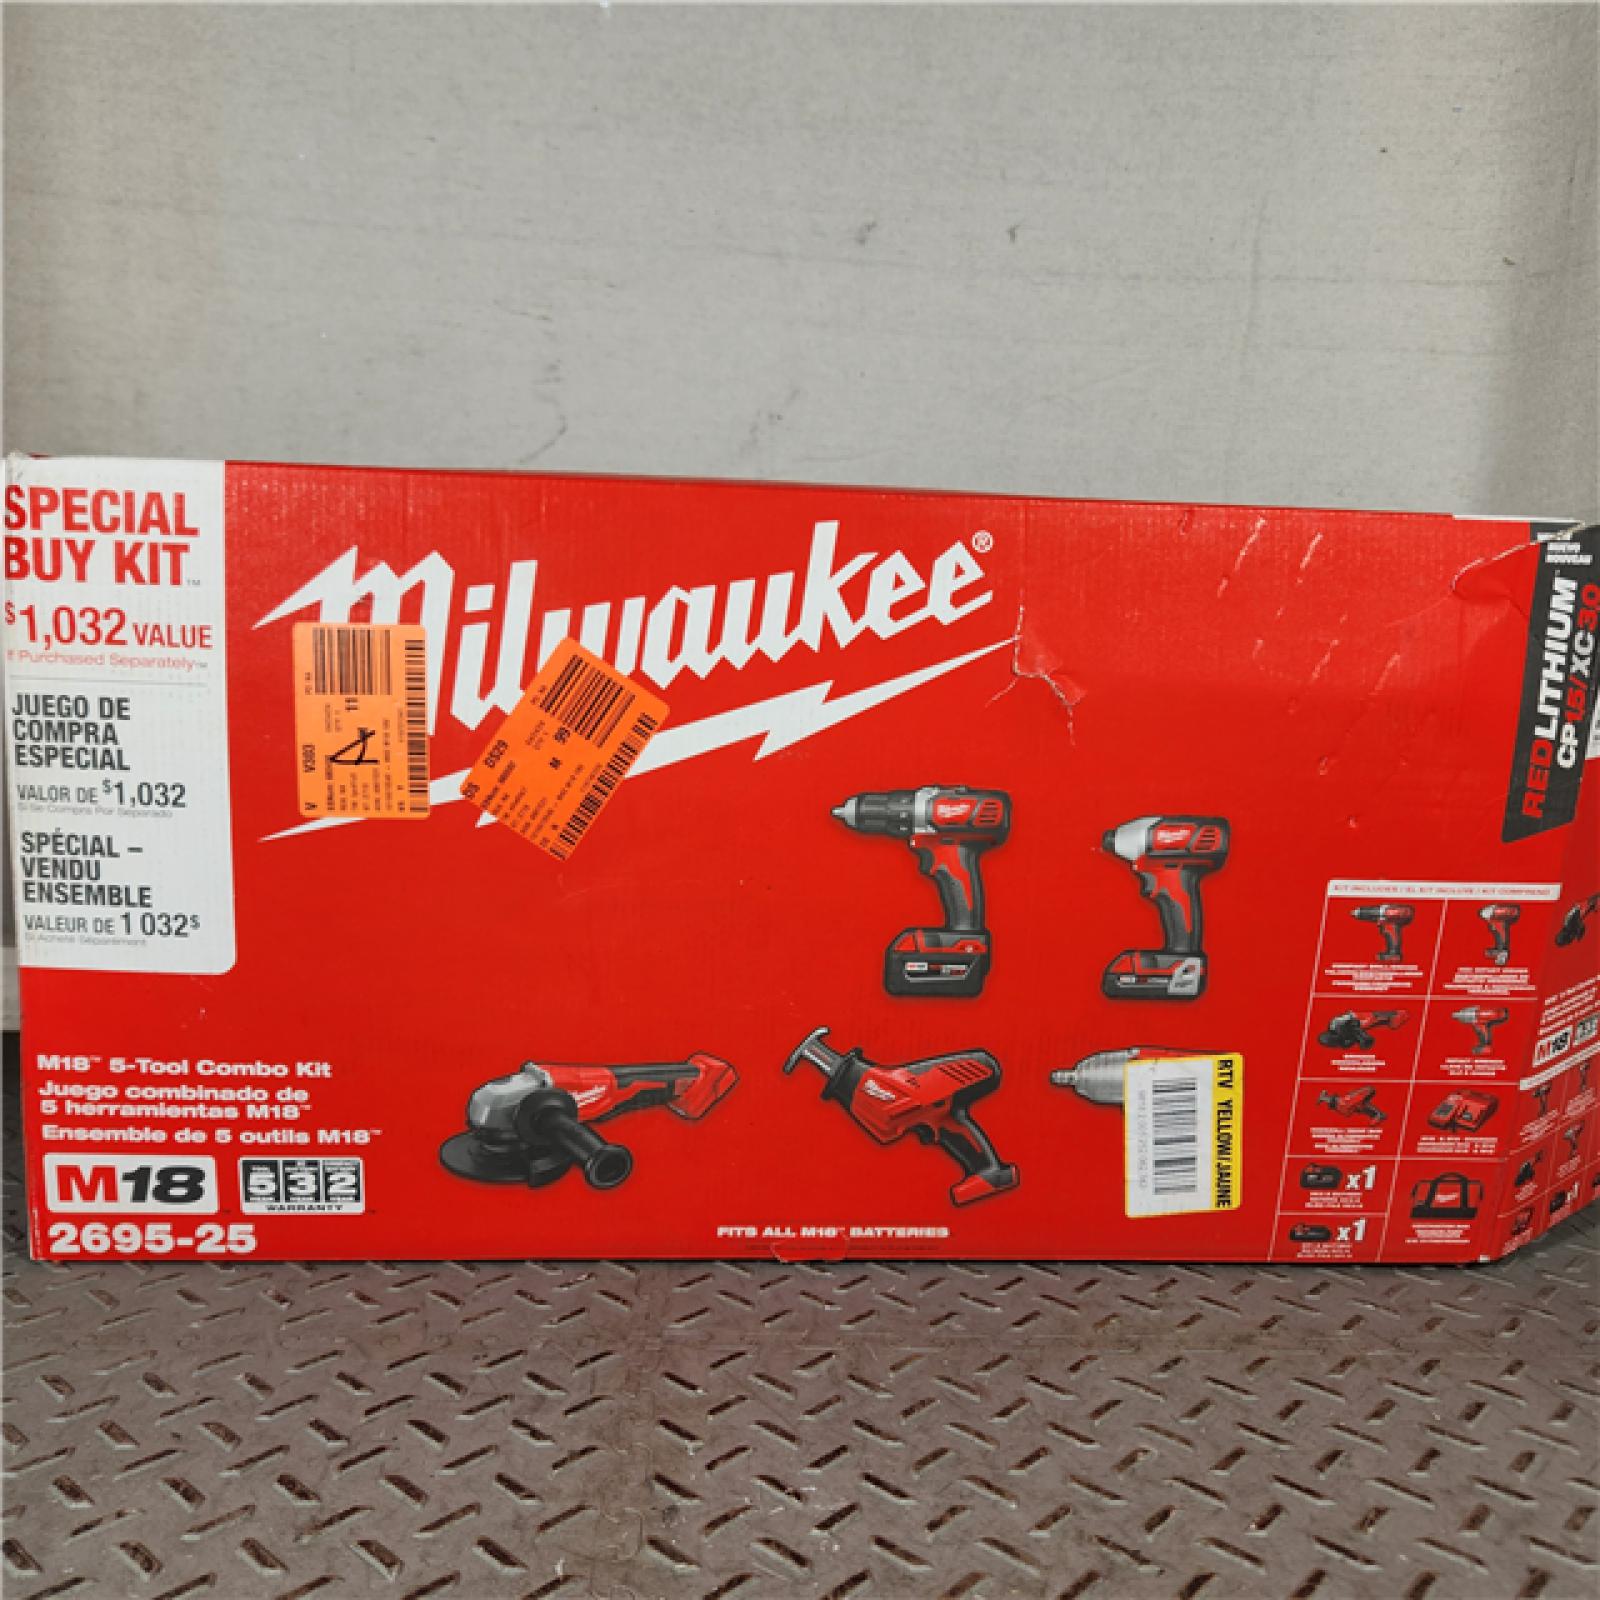 Houston location- AS-IS Milwaukee 5 TOOL Combo Kit Appears in new condition